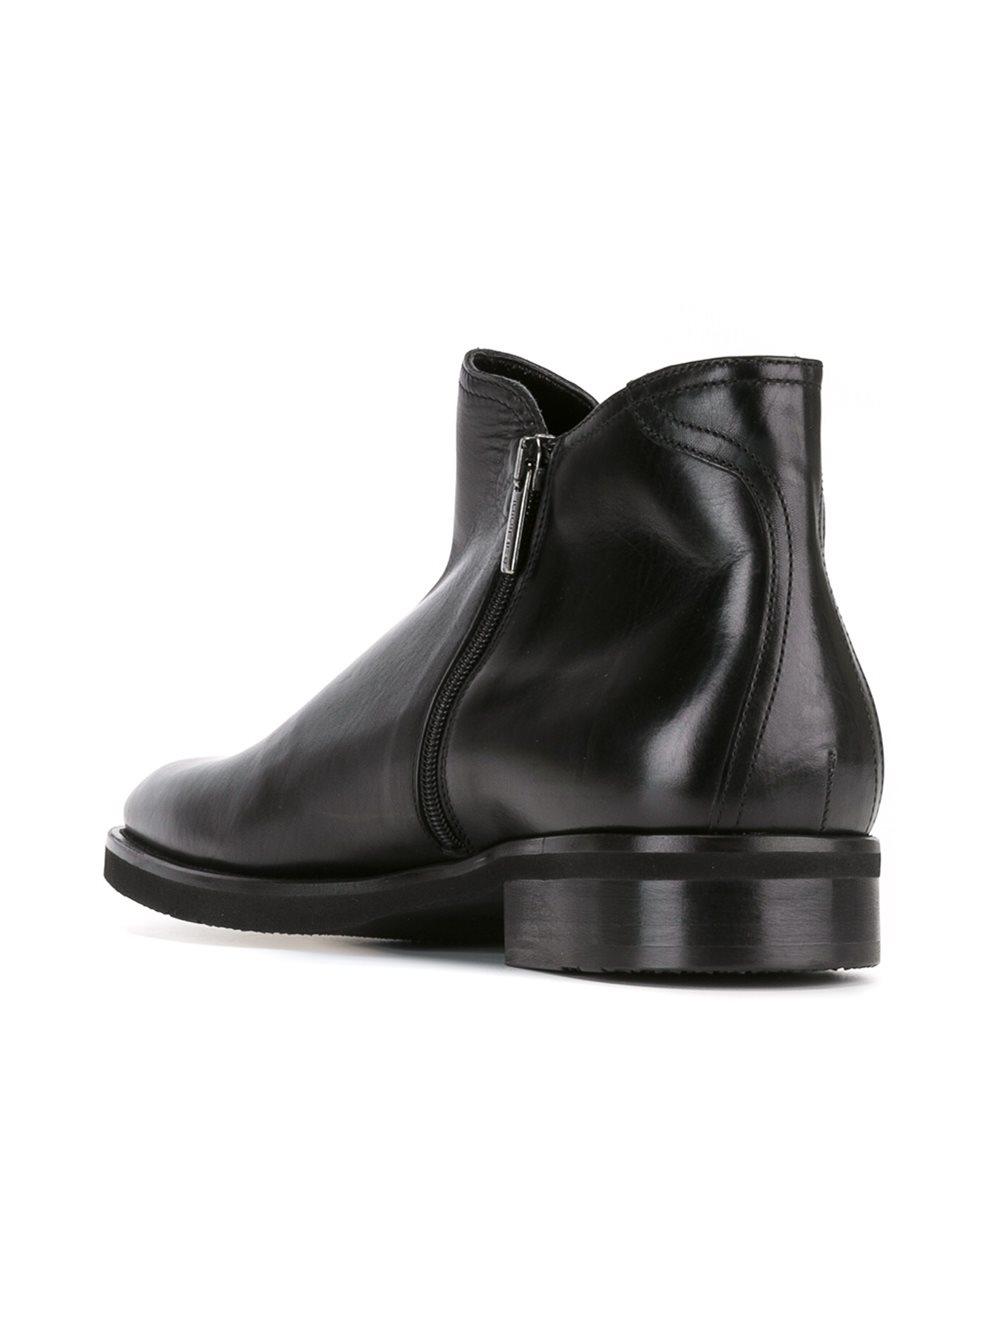 Baldinini Leather Chelsea Boots in Black for Men - Lyst